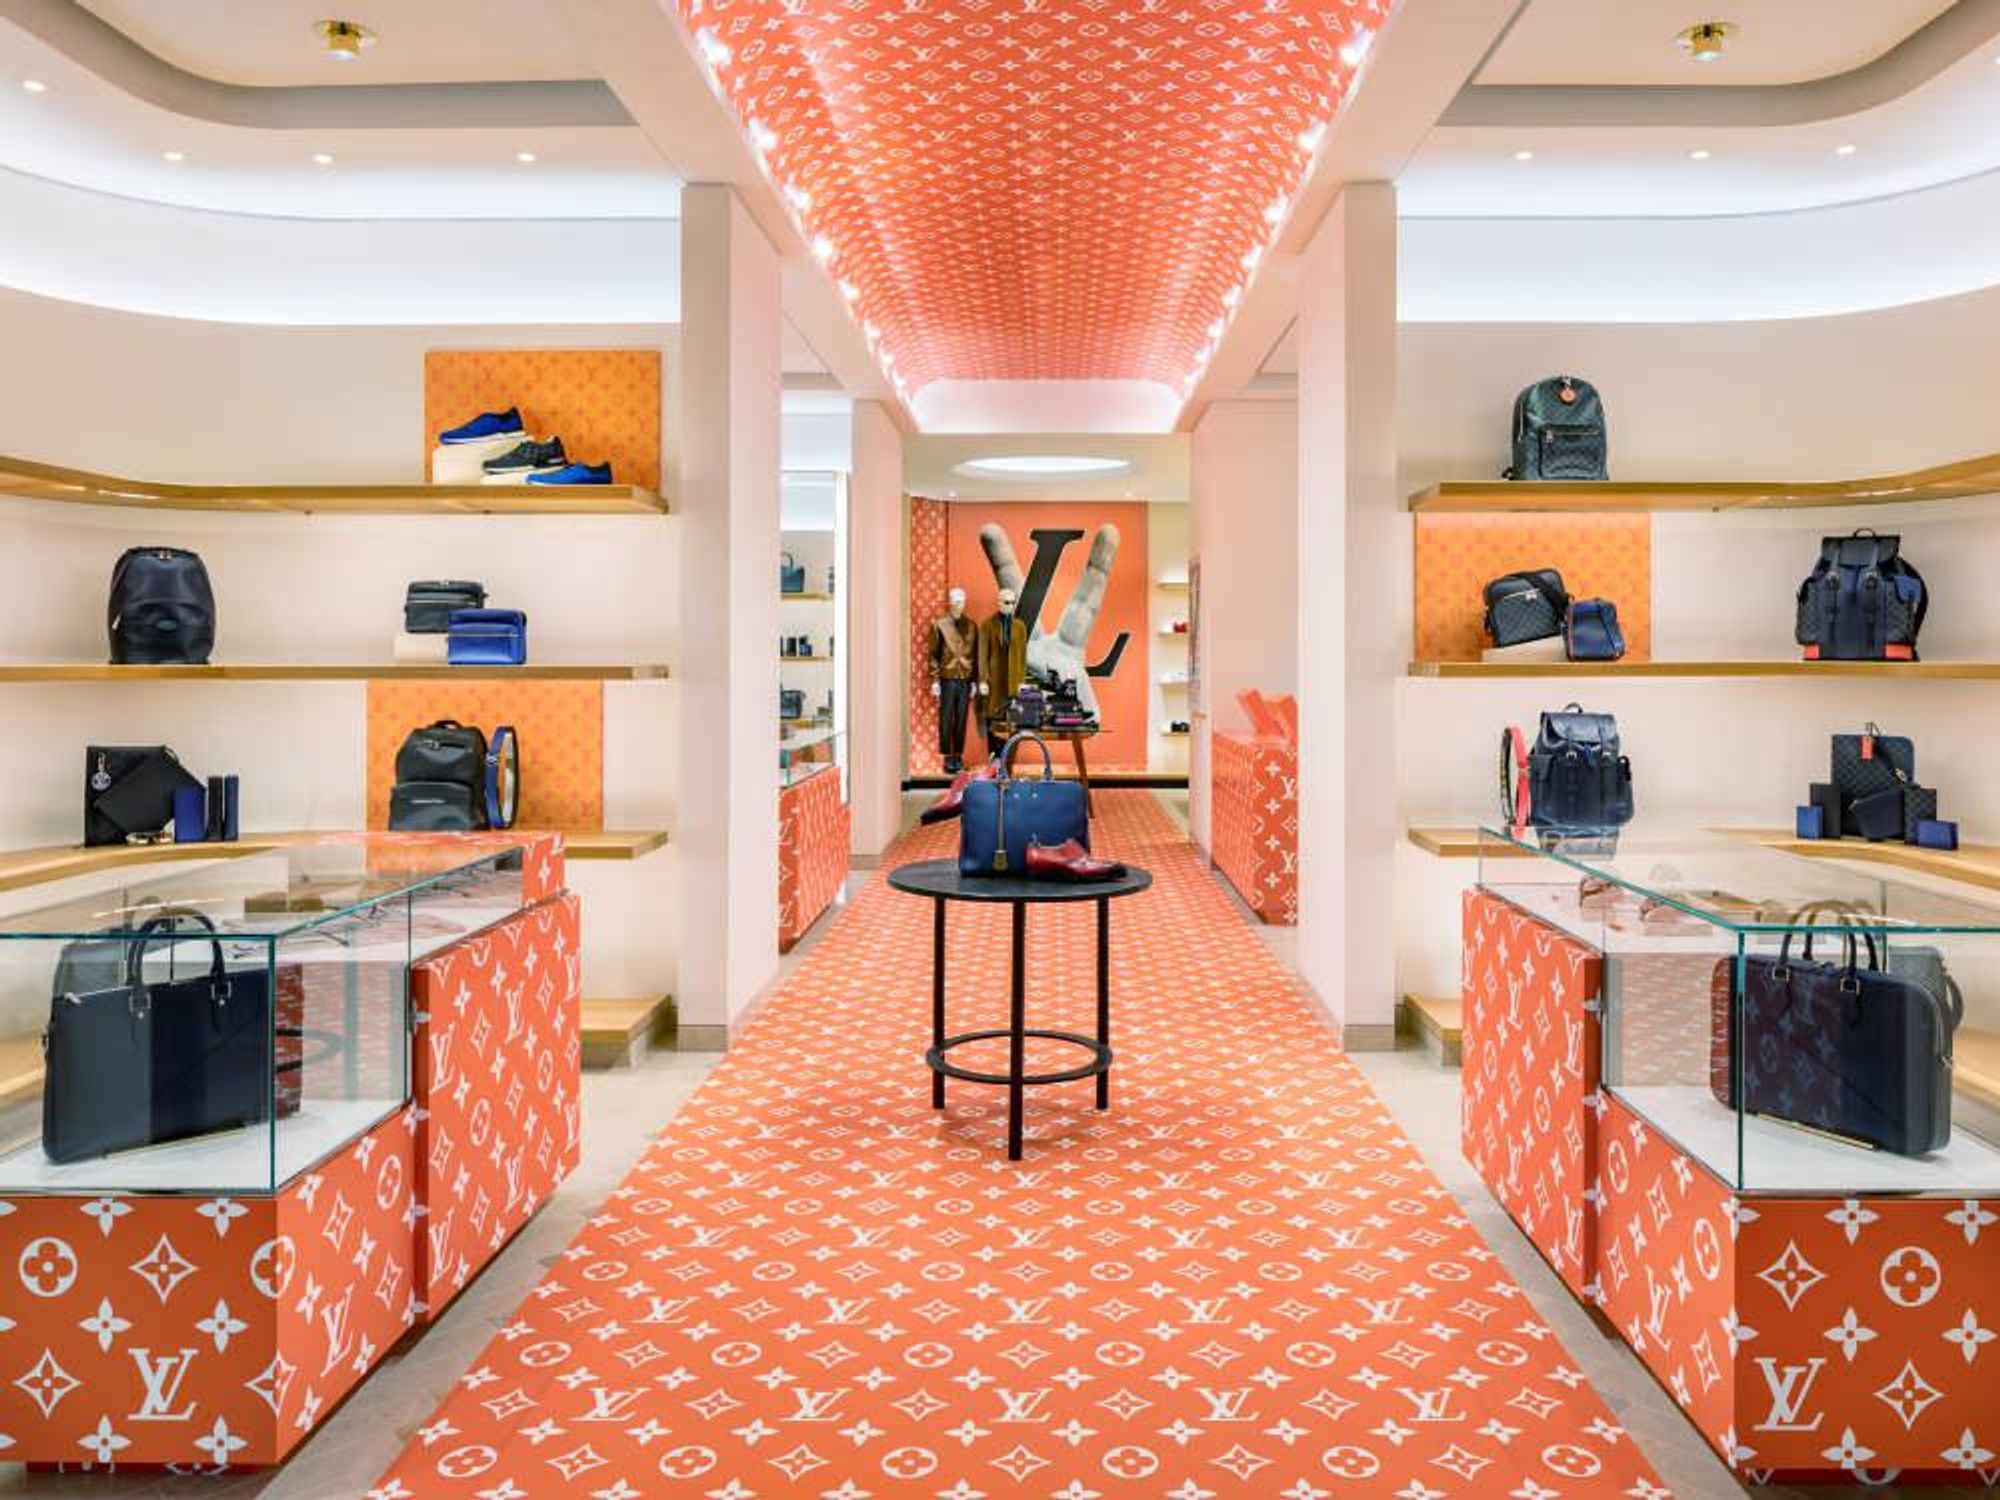 Where to shop in Dallas right now: 8 must-hit stores for August -  CultureMap Dallas